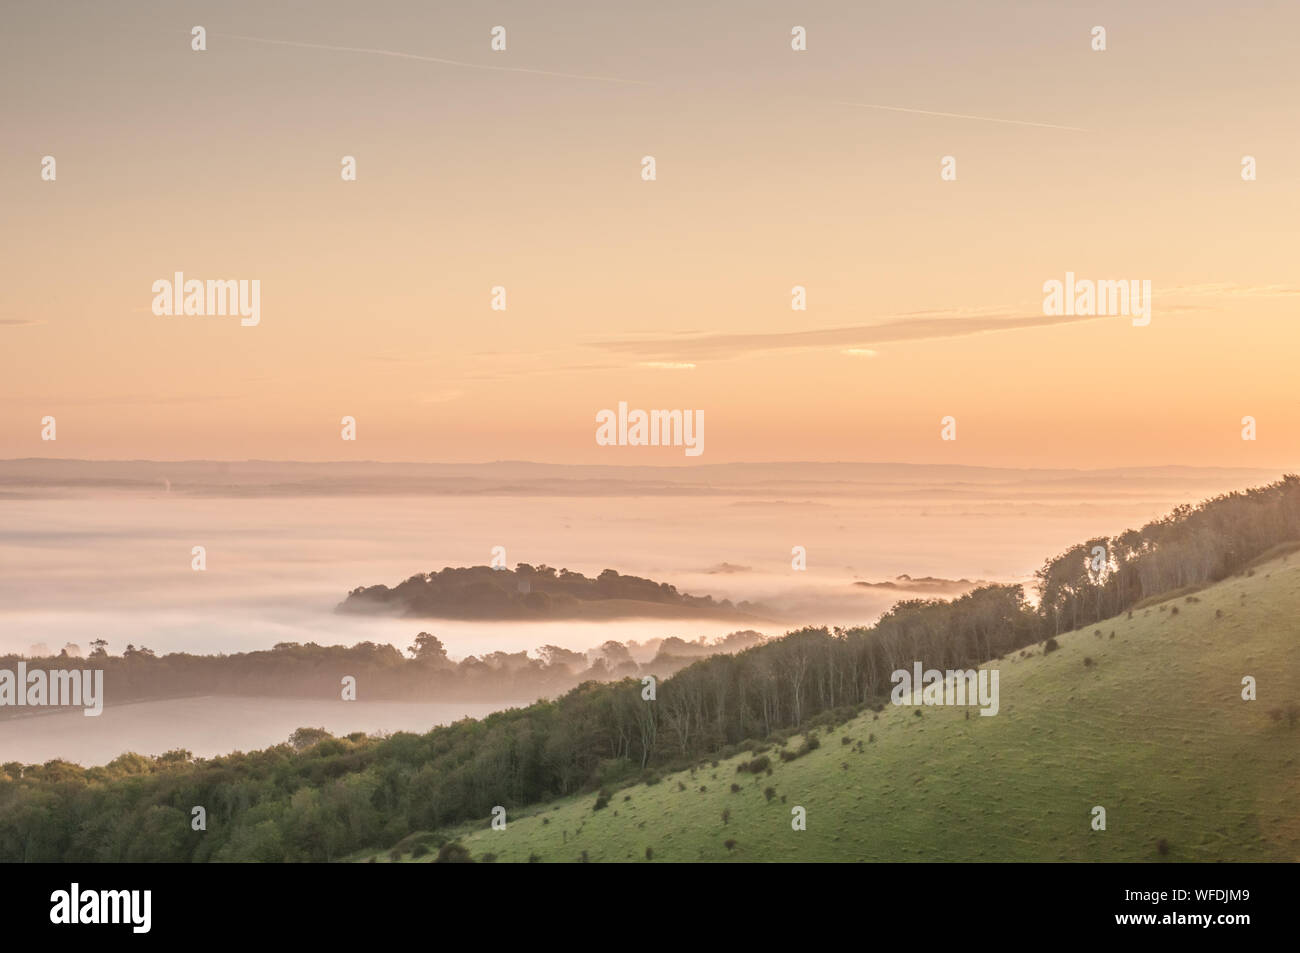 Firle, Lewes, East Sussex, UK..31st August 2019..Tranquil ethereal scene as early morning mist envelopes the countryside. . Stock Photo